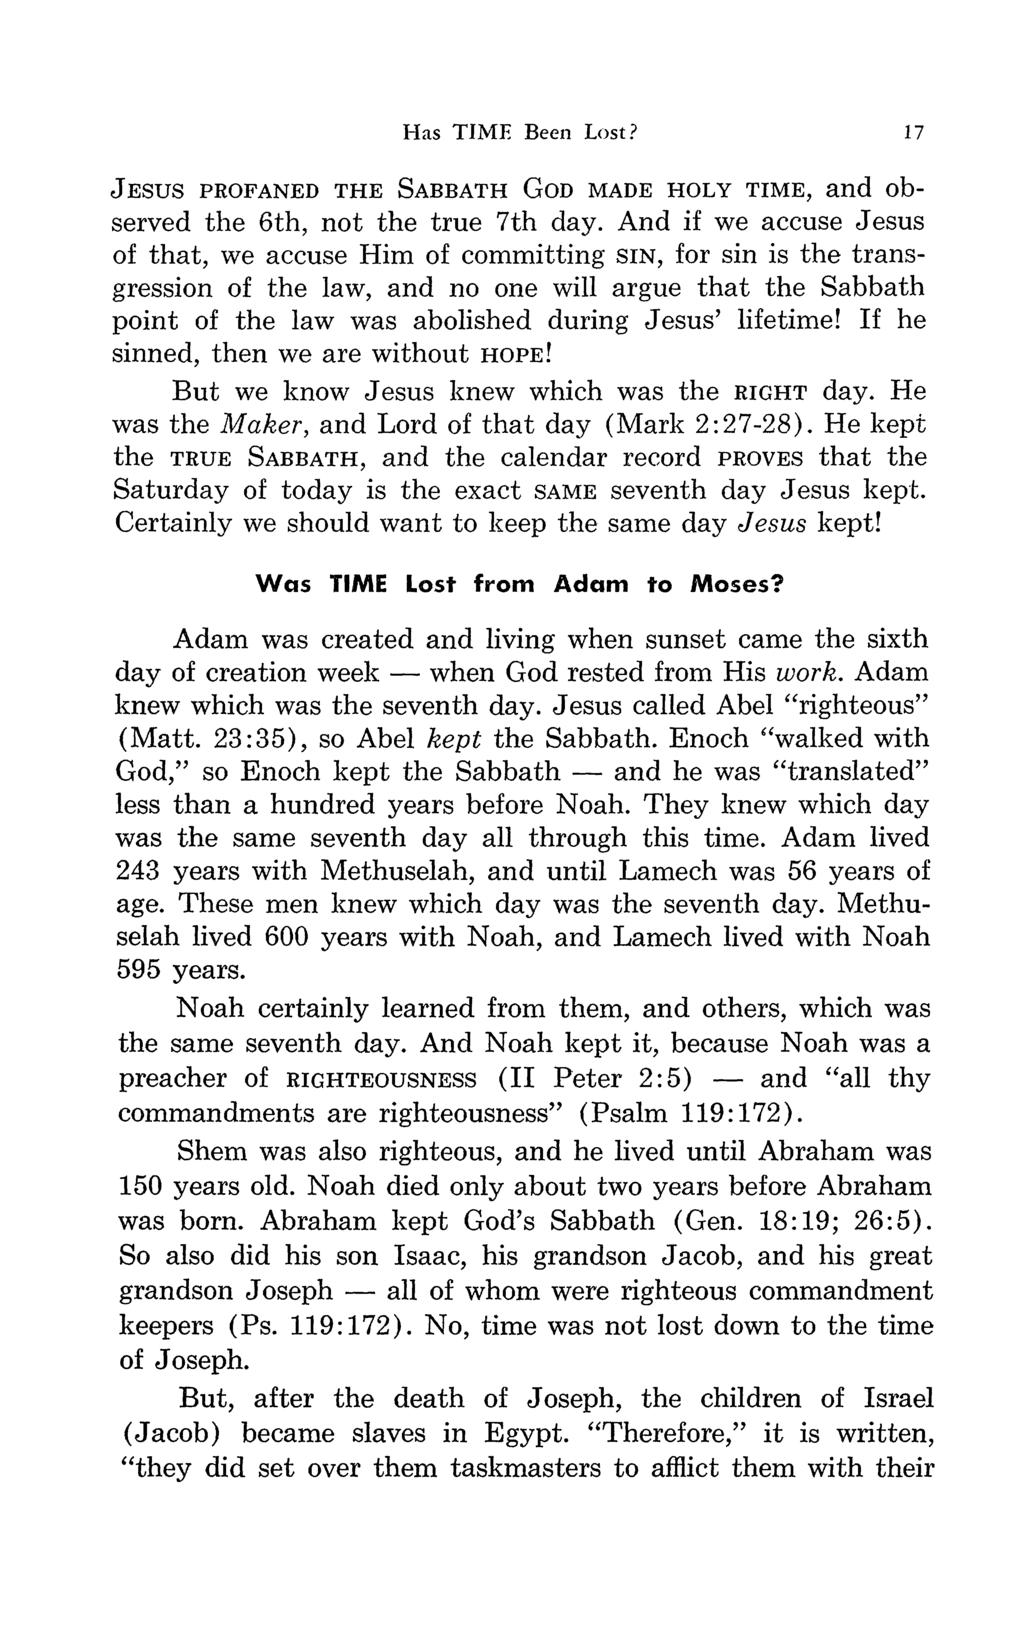 Has TIME Been Lost? 17 JESUS PROFANED THE SABBATH GOD MADE HOLY TIME, and observed the 6th, not the true 7th day.